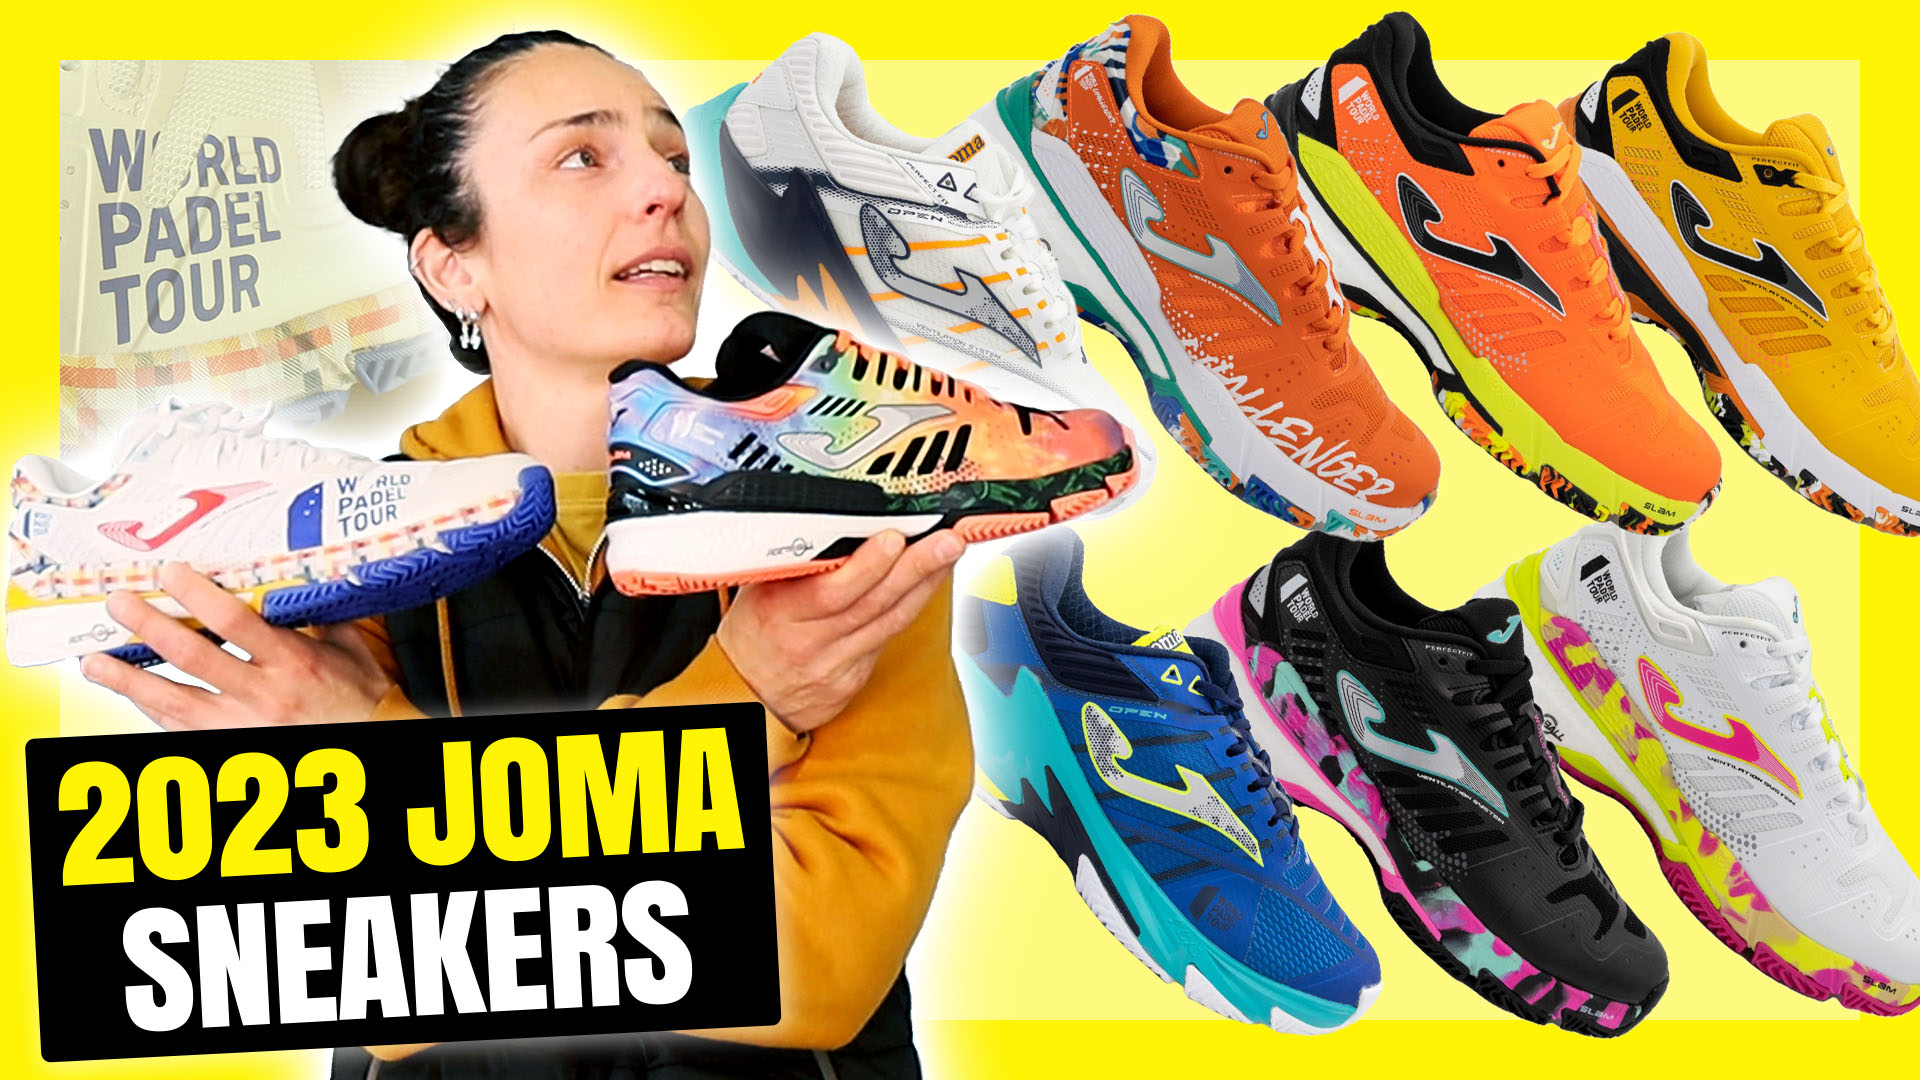 New Joma 2023 padel shoes, the new World Padel Tour collection